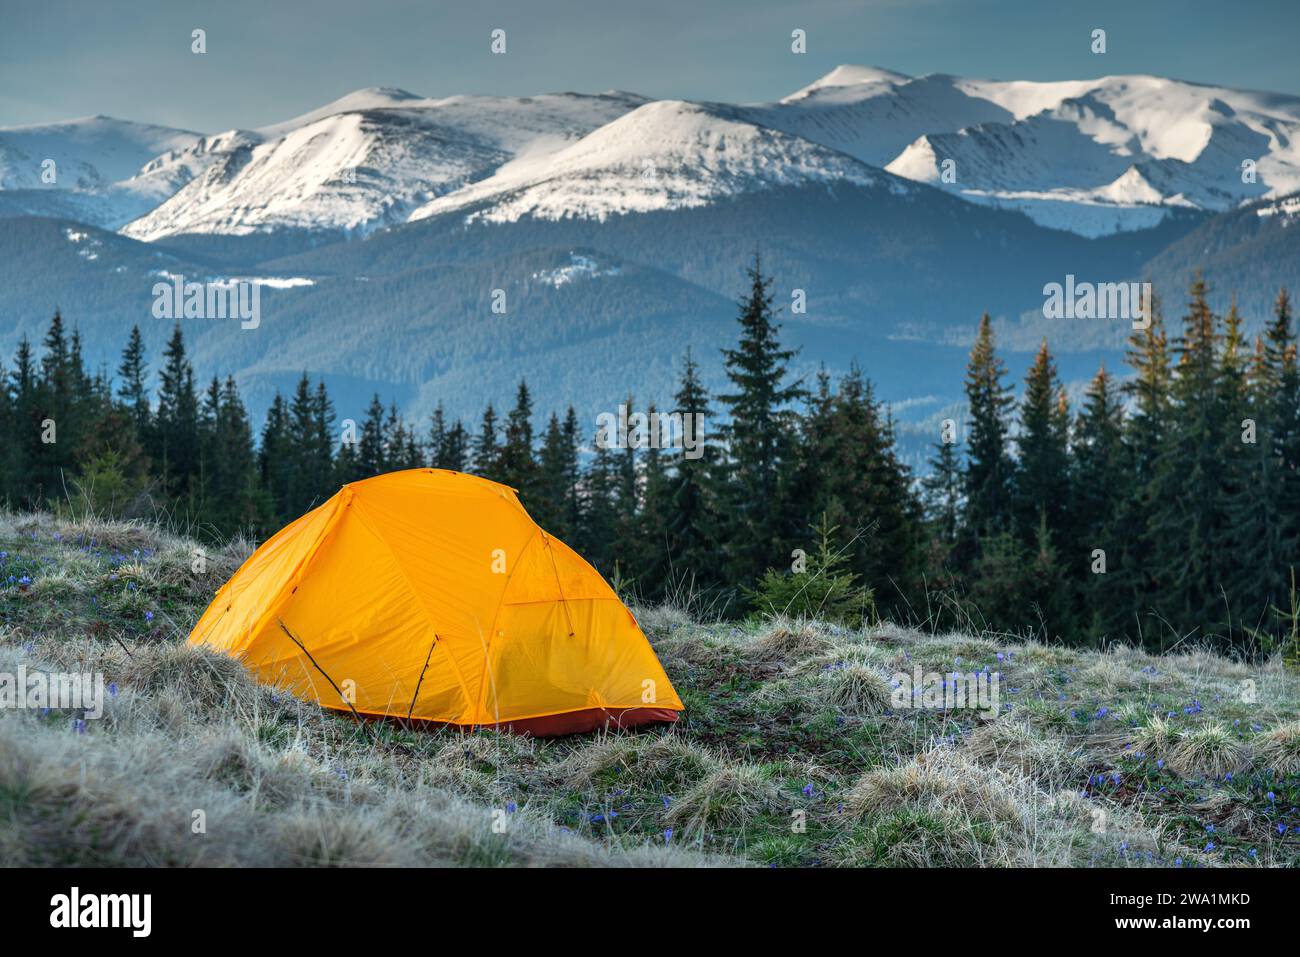 Tent Camping In The Mountains, First Morning Light Stock Photo